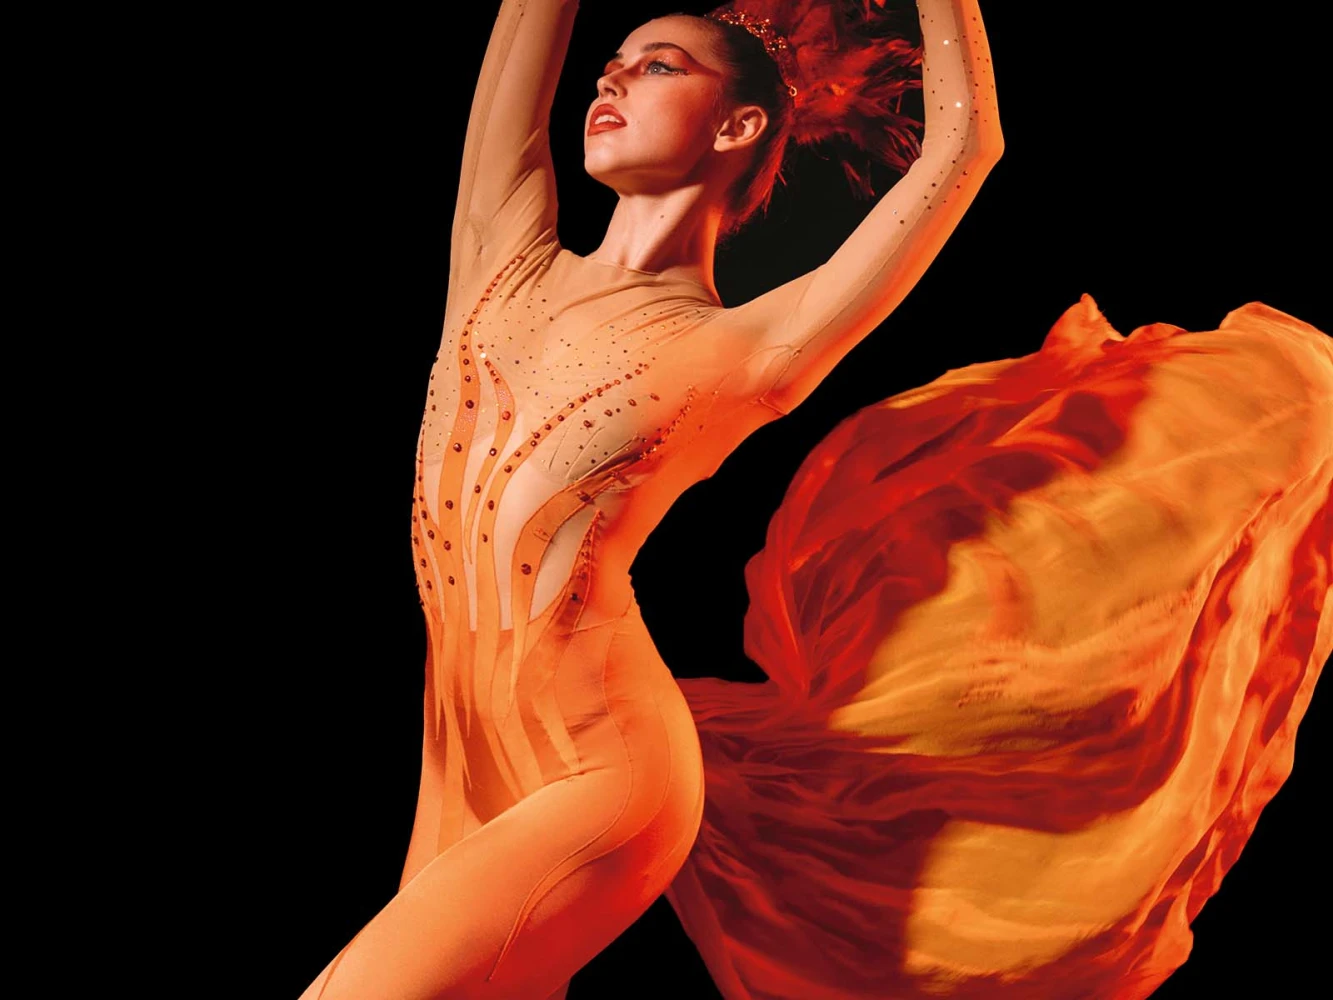 Firebird & Serenade - Royce Hall: What to expect - 1